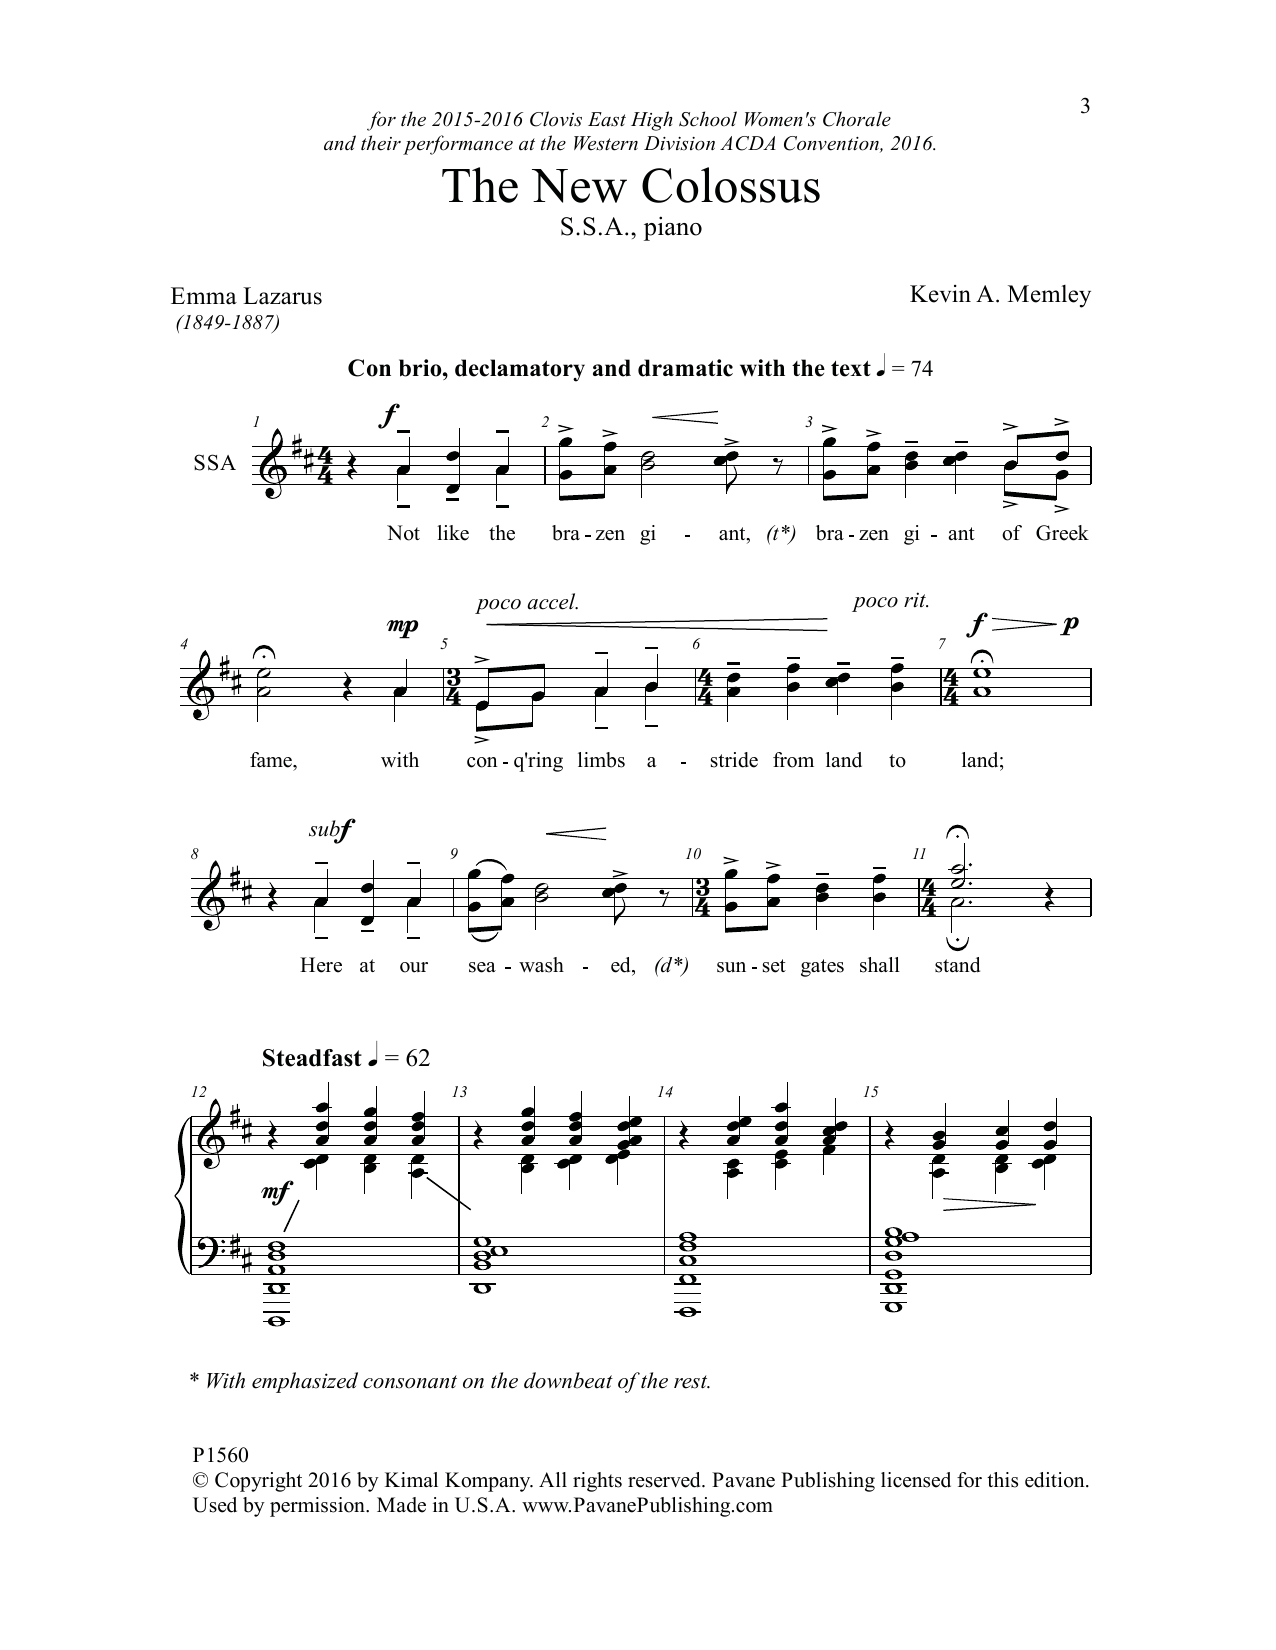 Download Kevin Memley The New Colossus Sheet Music